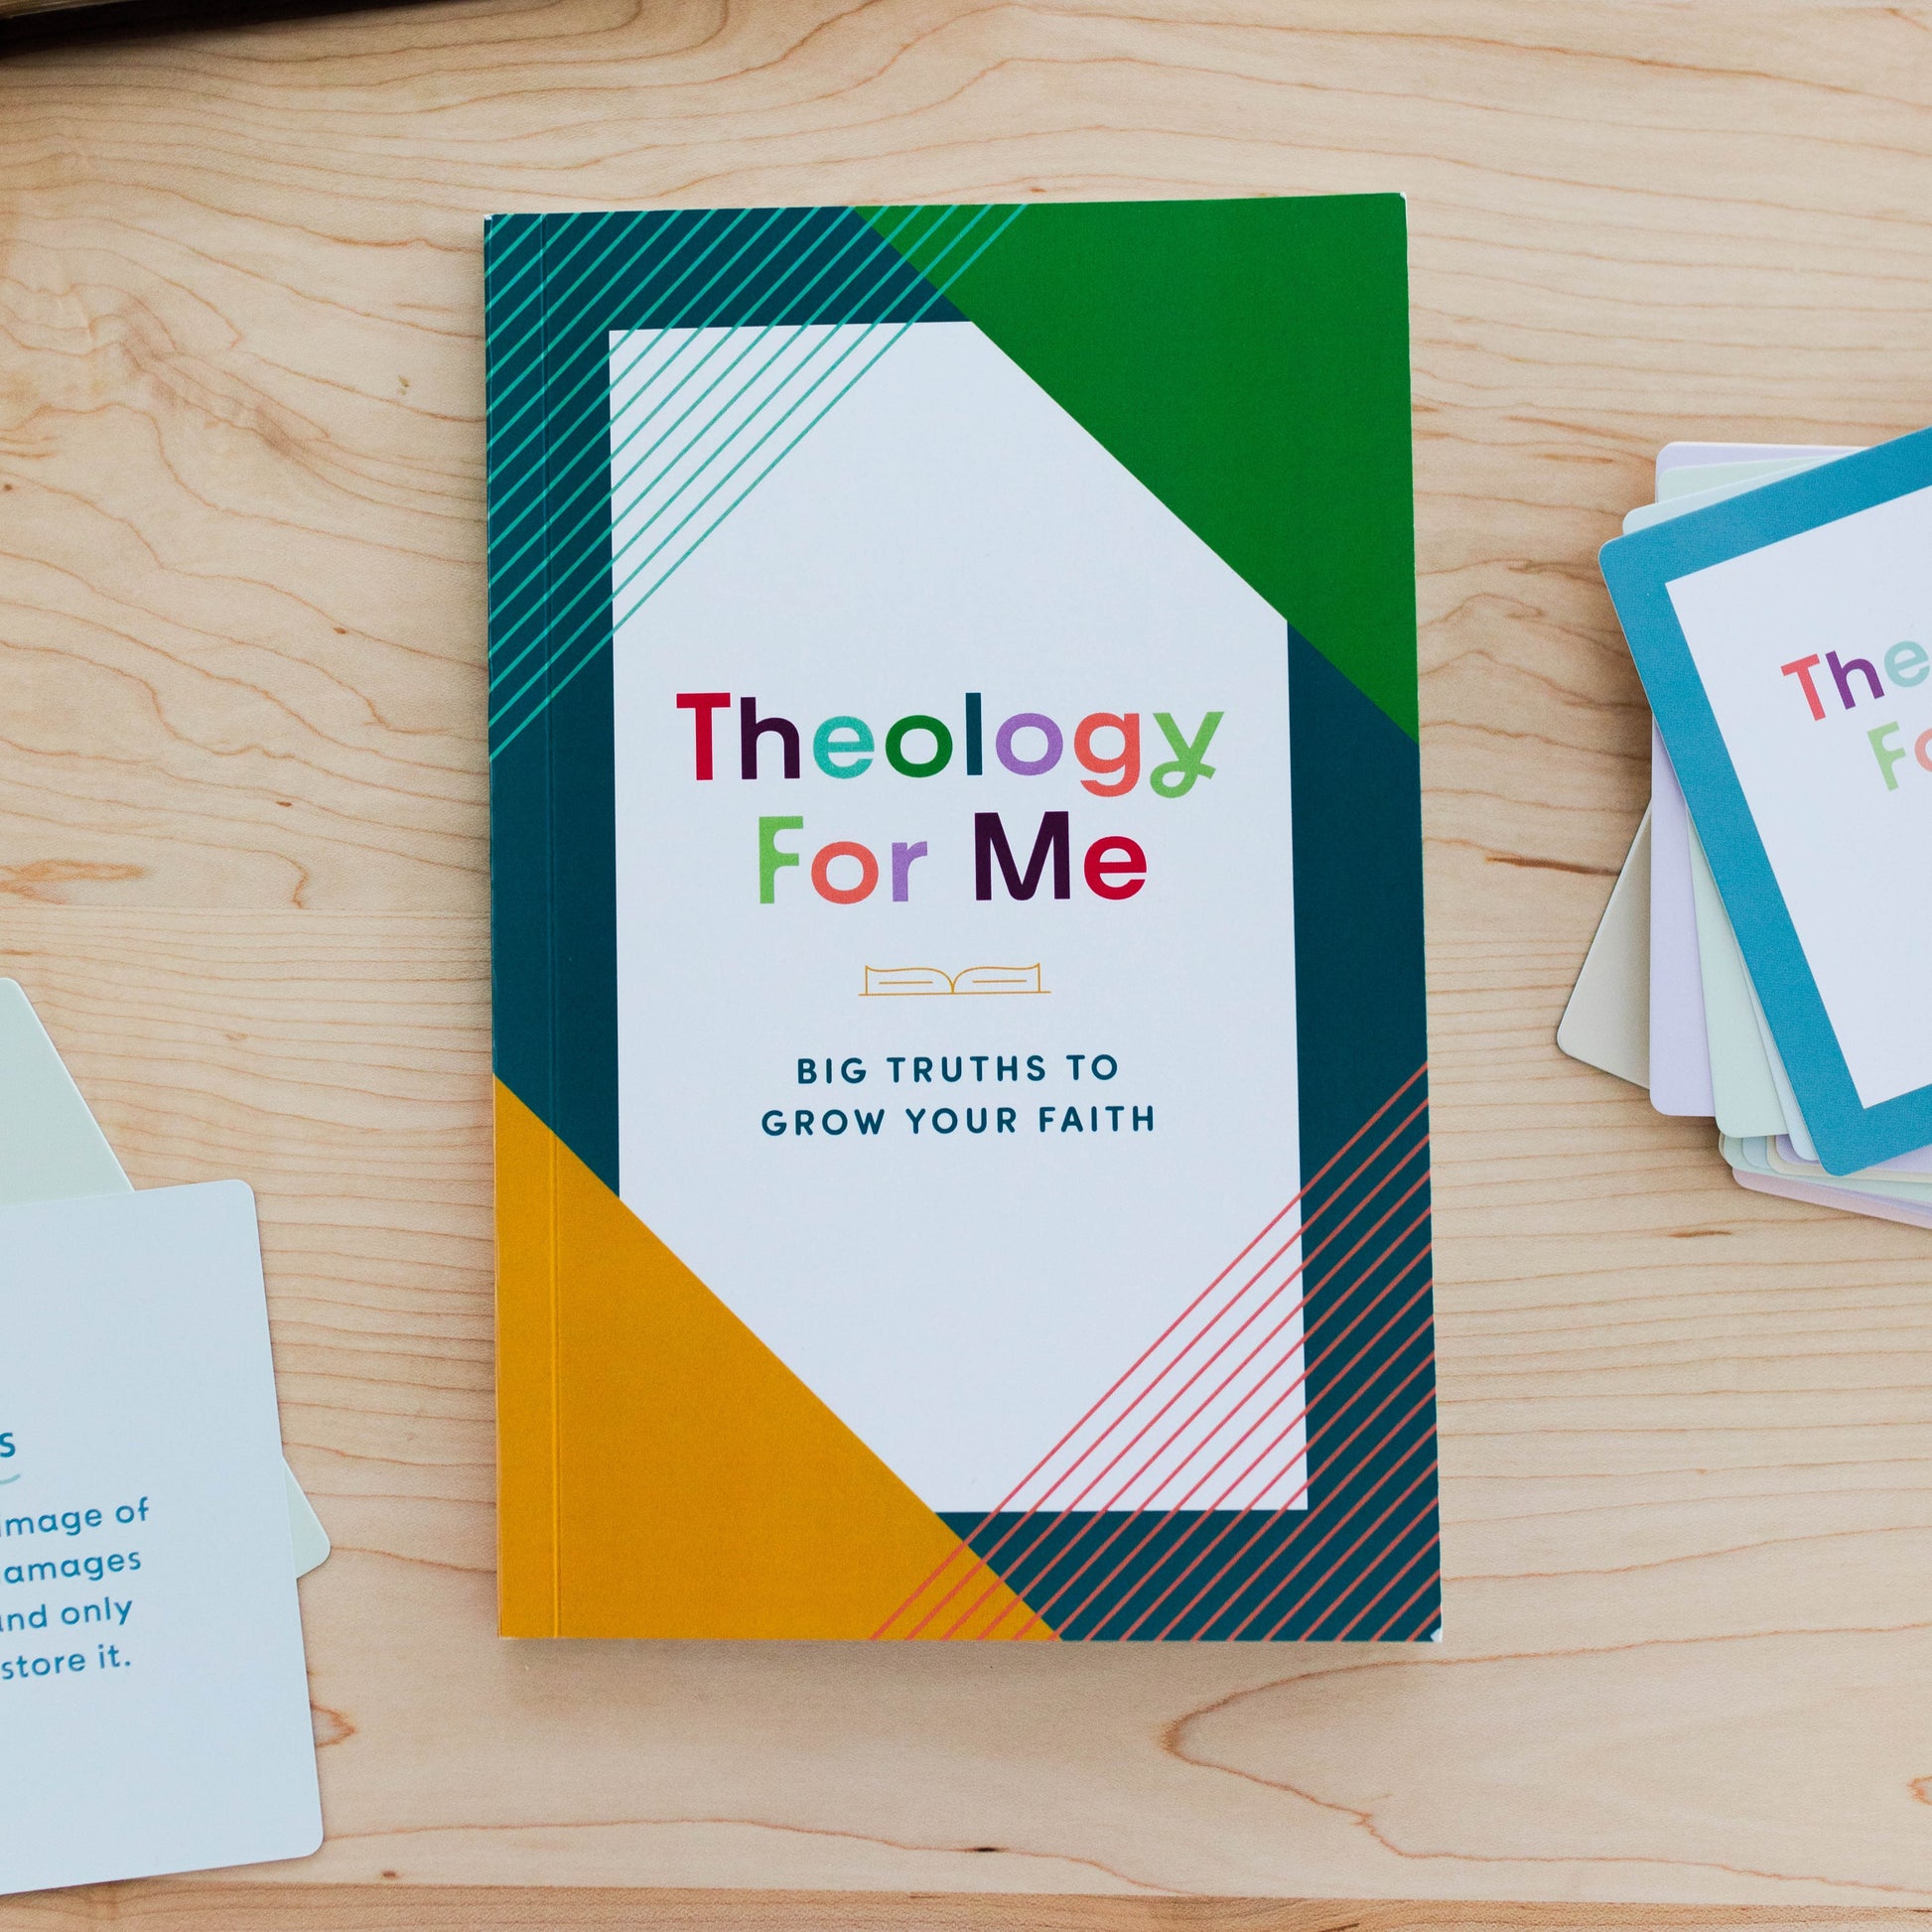 Theology For Me | Big Truths to Grow Your Faith | TDGC